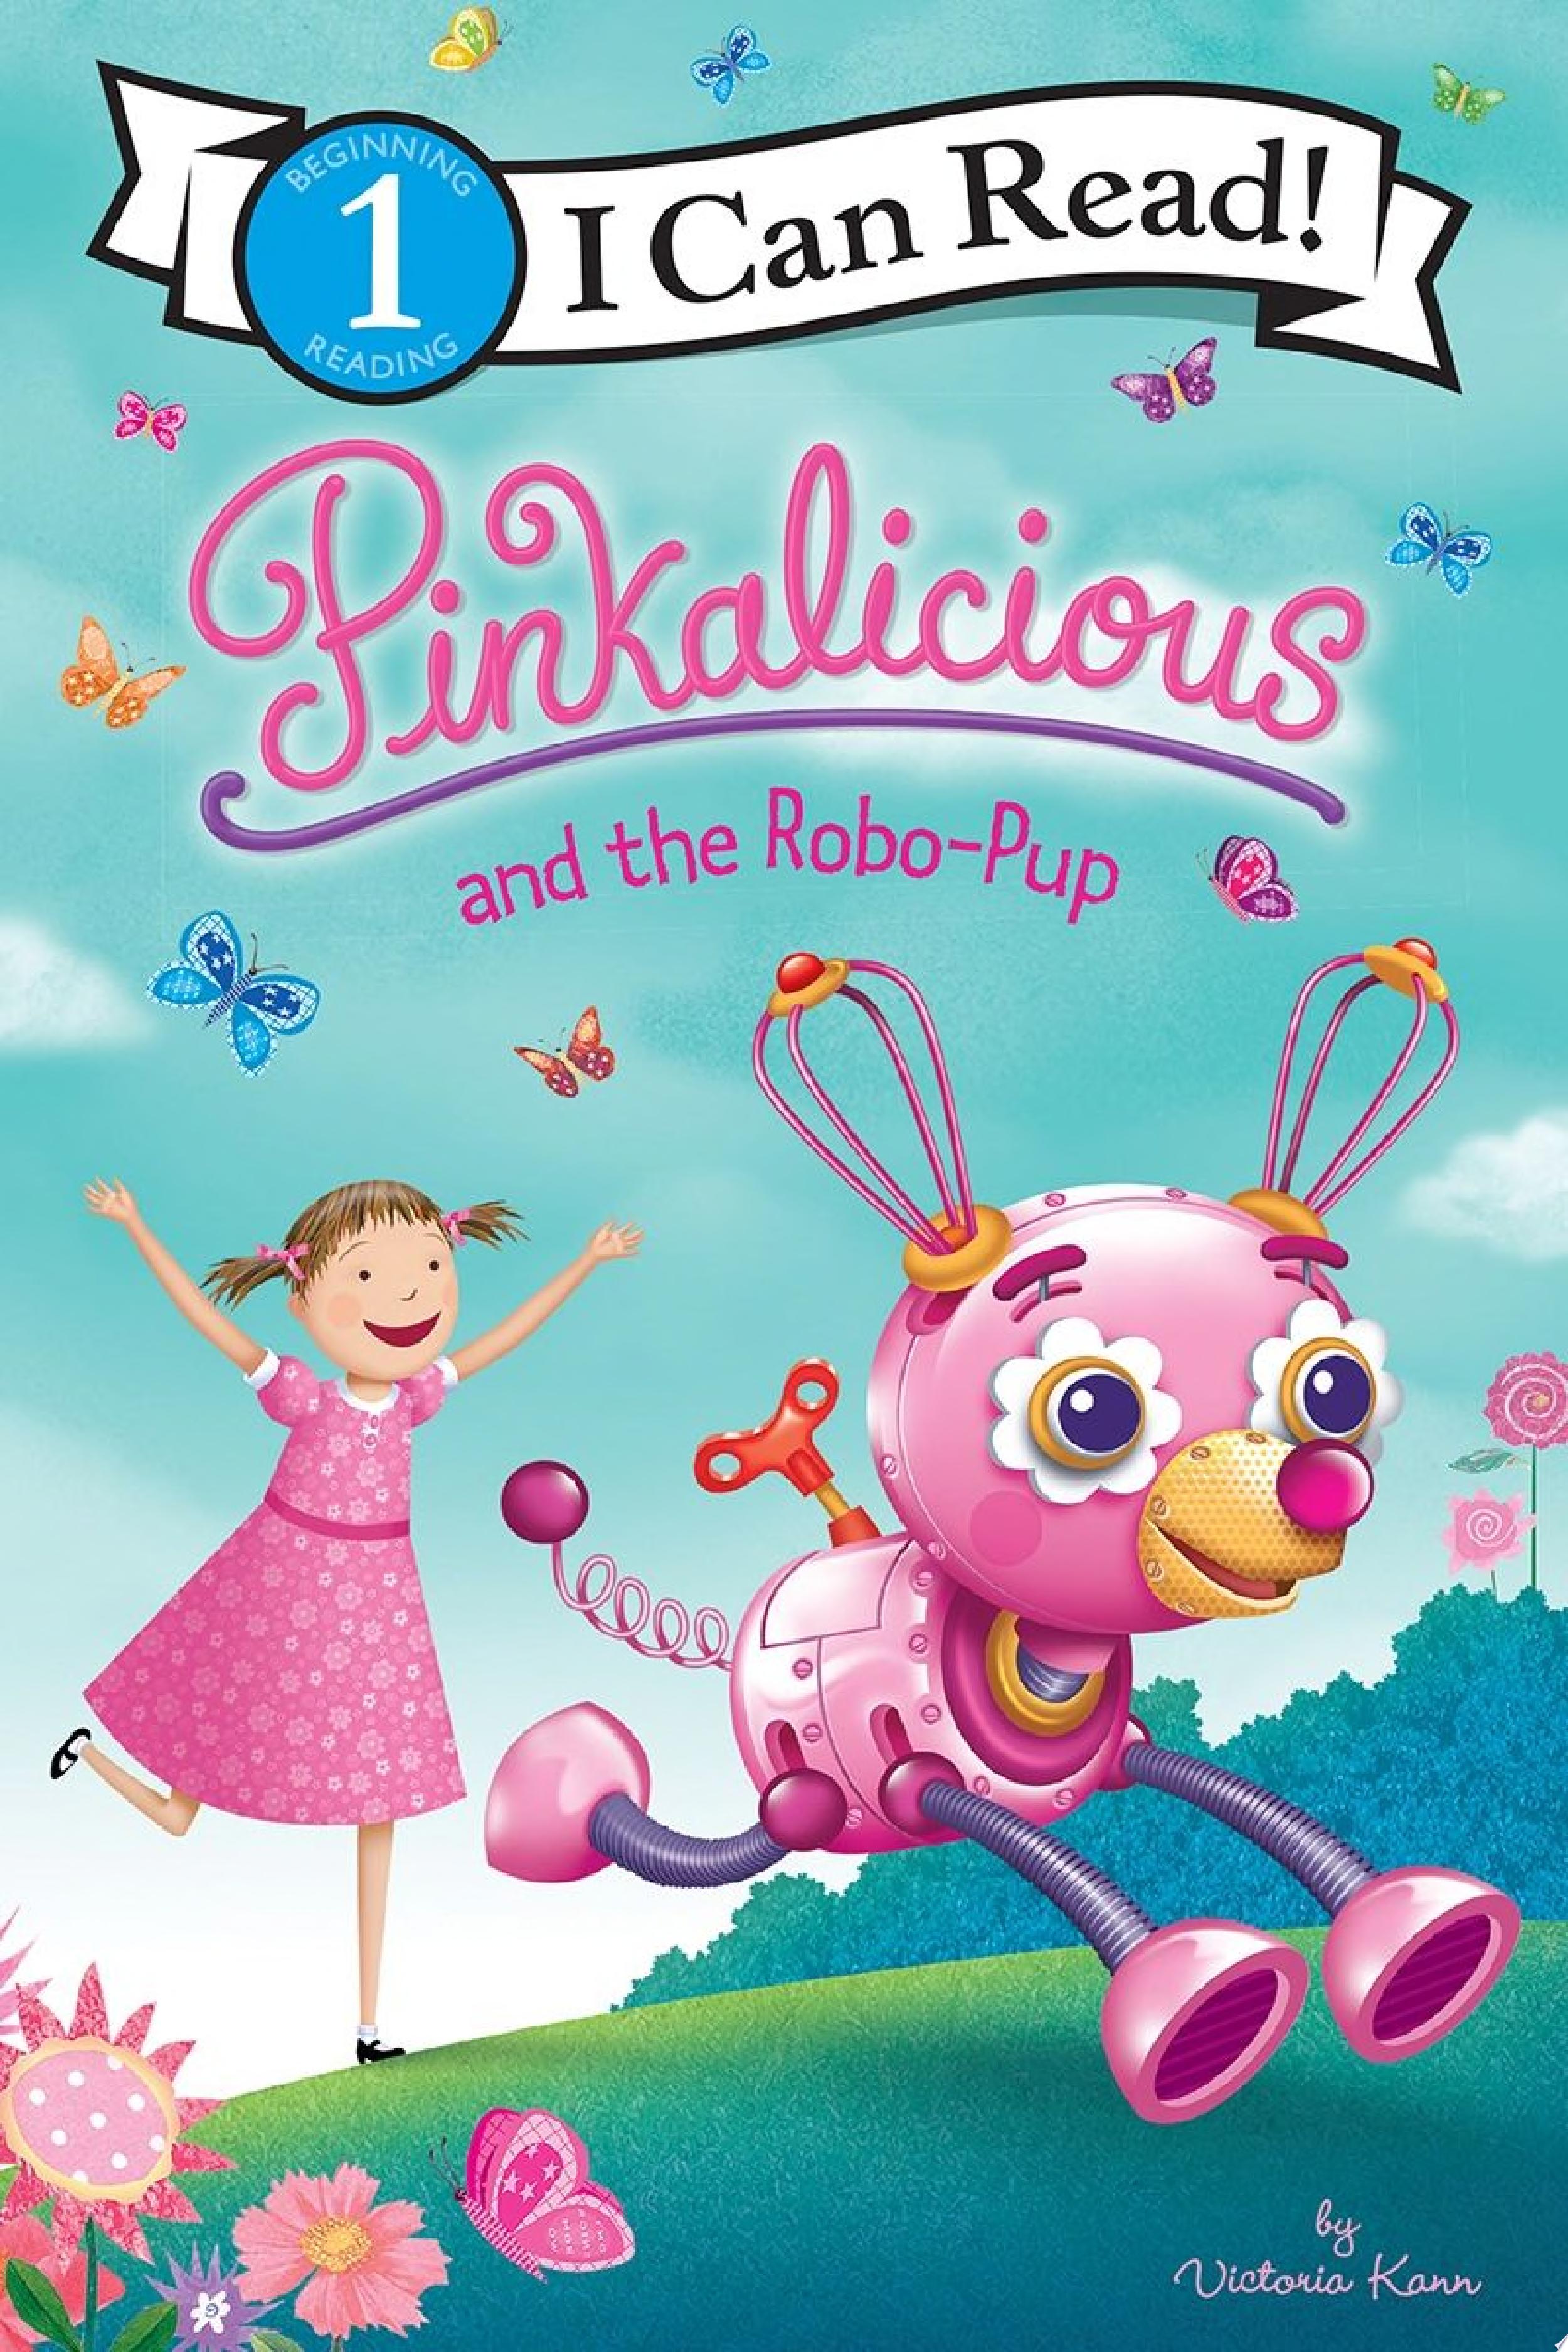 Image for "Pinkalicious and the Robo-Pup"